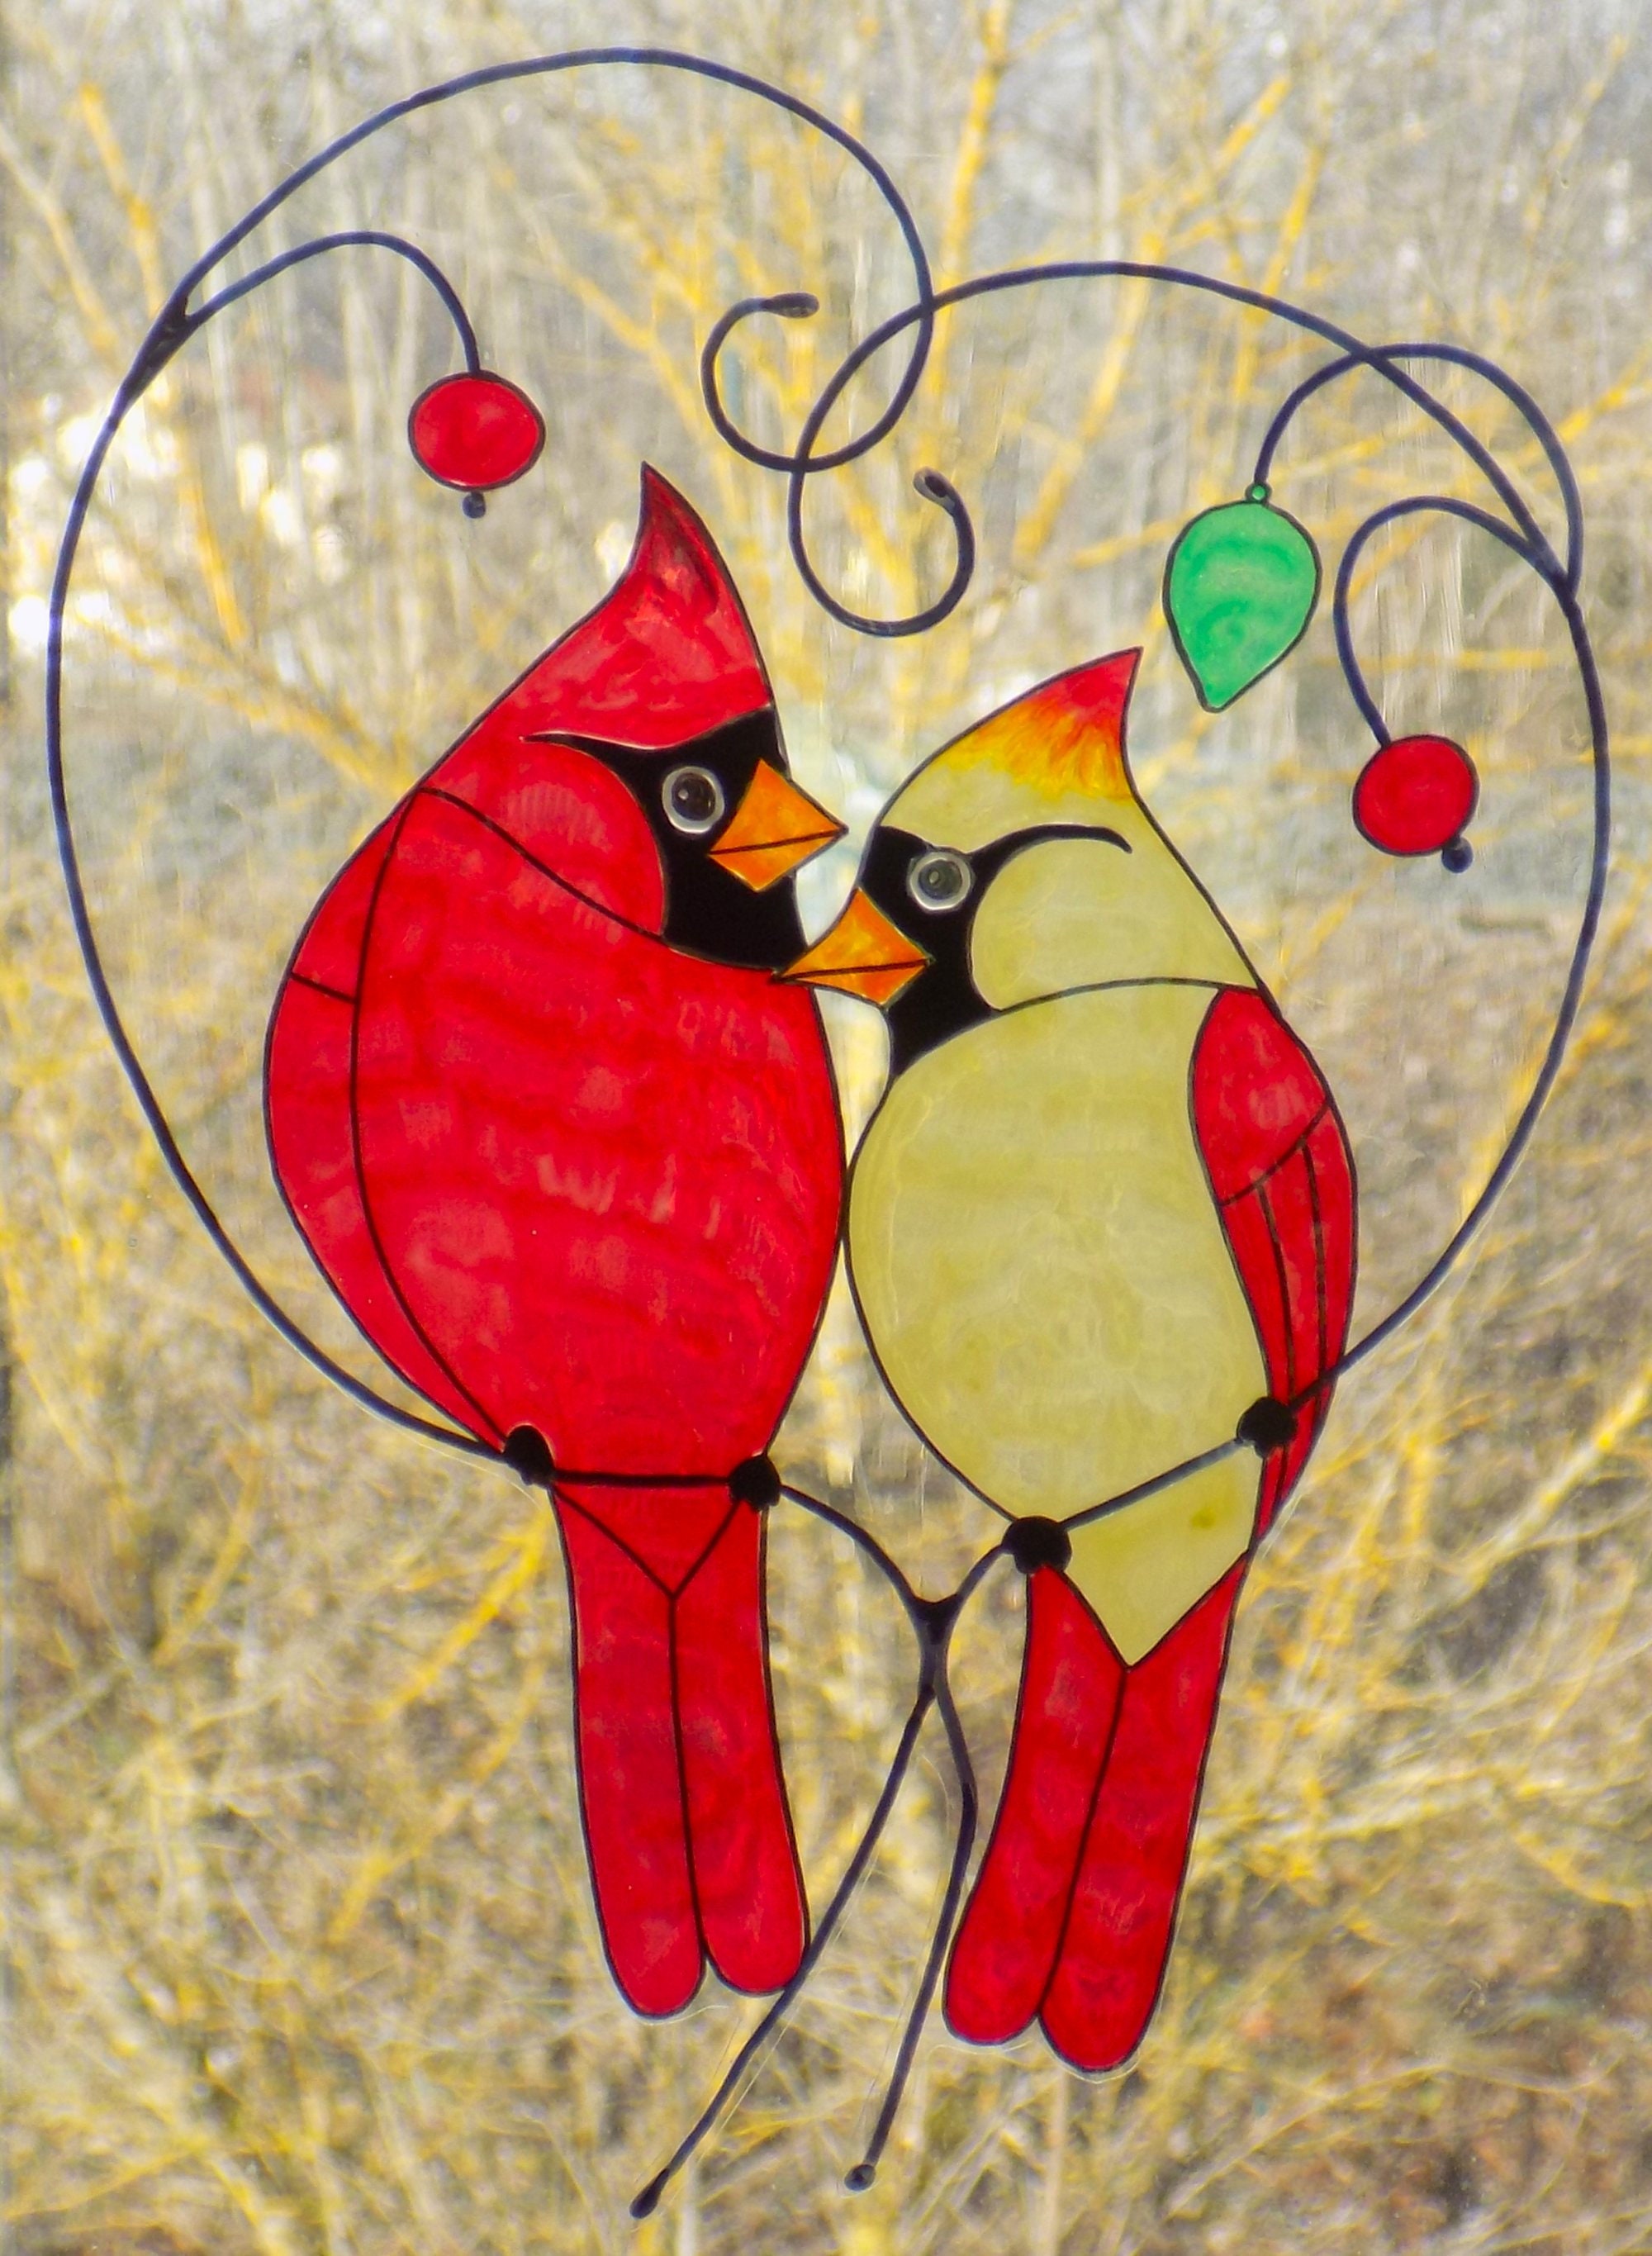 Wicoart Sticker Window Cling Stained Glass Art St Valentin Cardinaux Inséparables